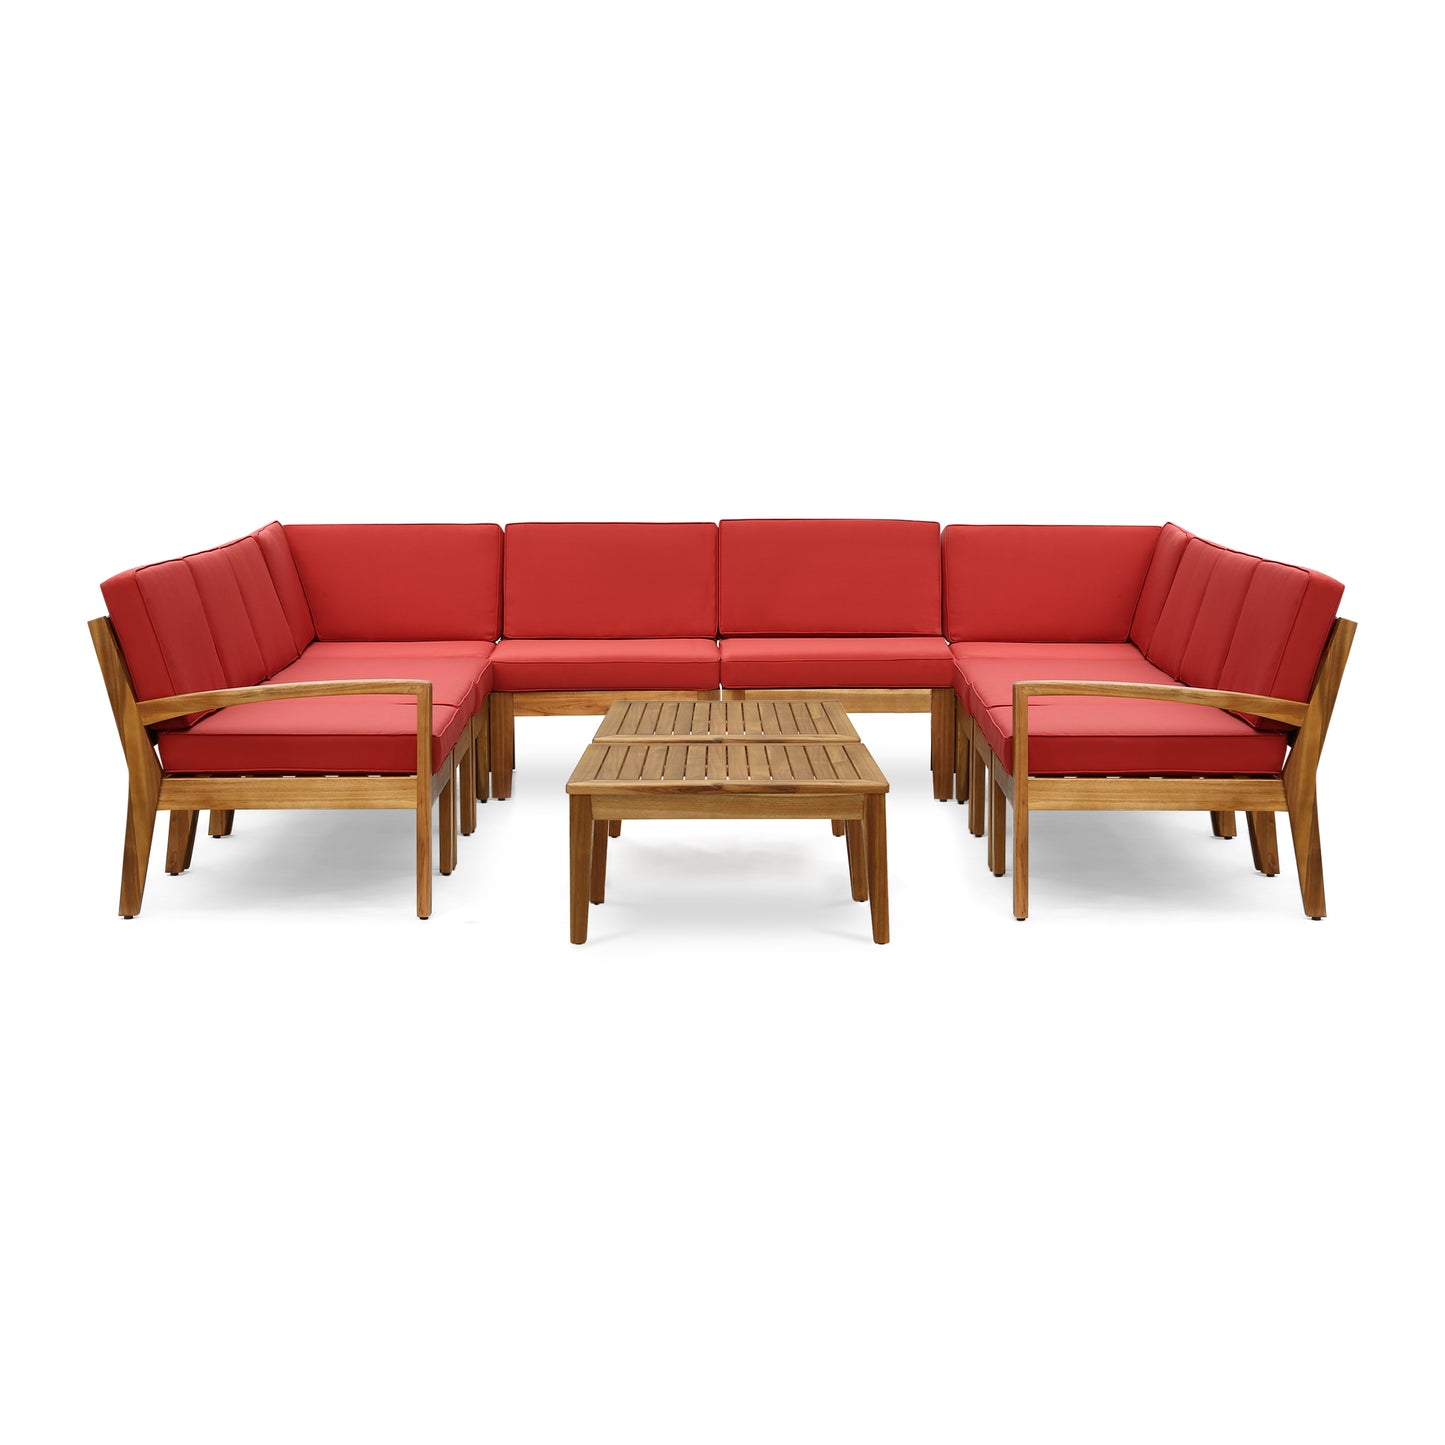 Ray Outdoor Acacia Wood 10 Seater Sectional Sofa Set with Two Coffee Tables